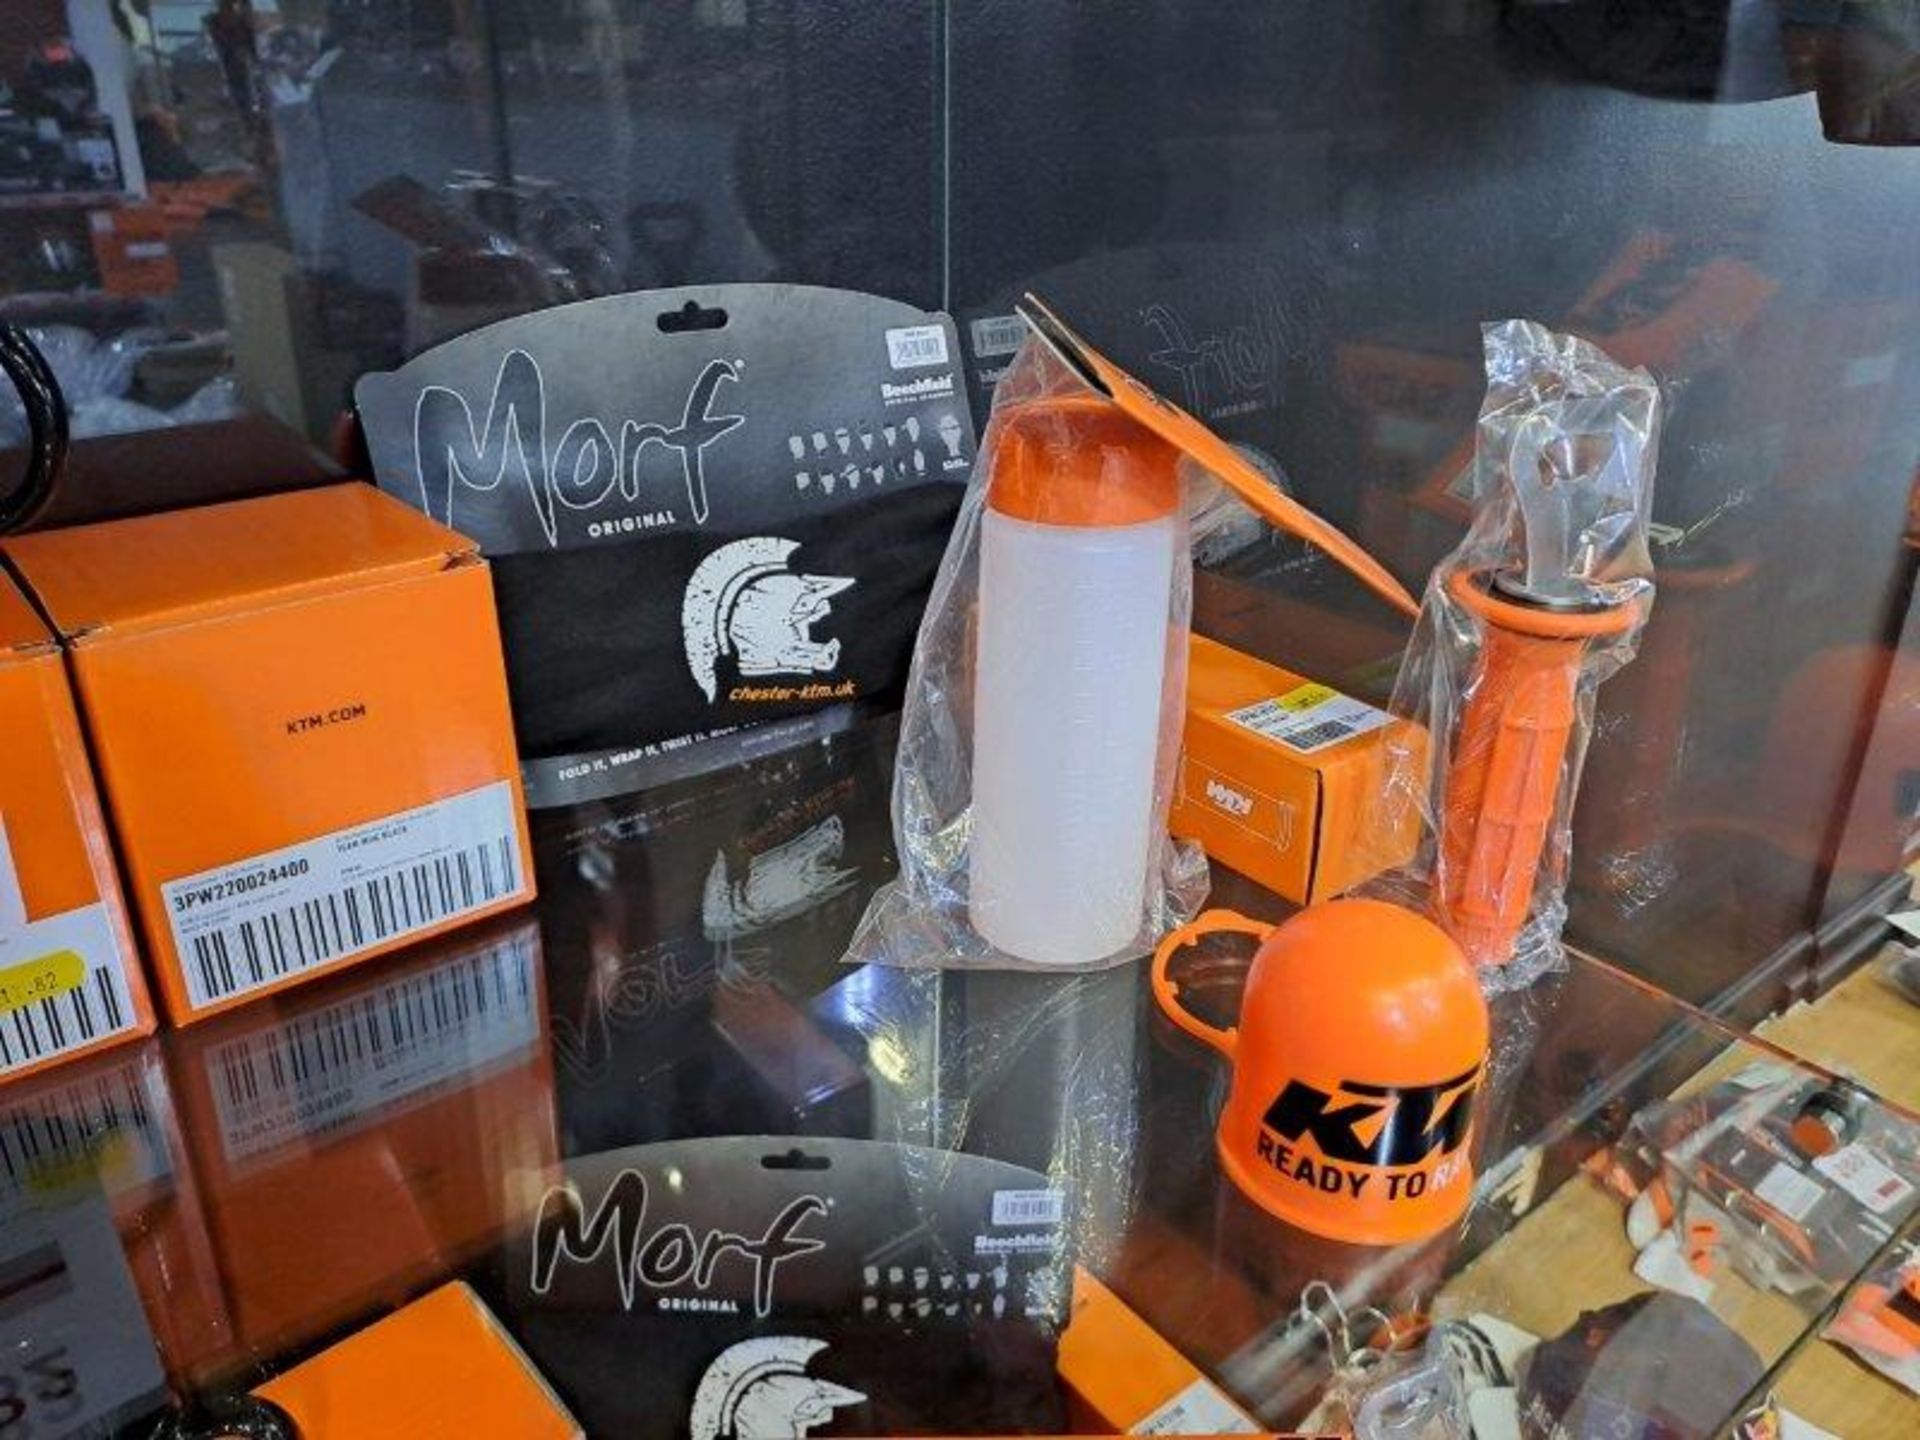 Contents of shelf of KTM Merchandise as pictured - Image 2 of 7